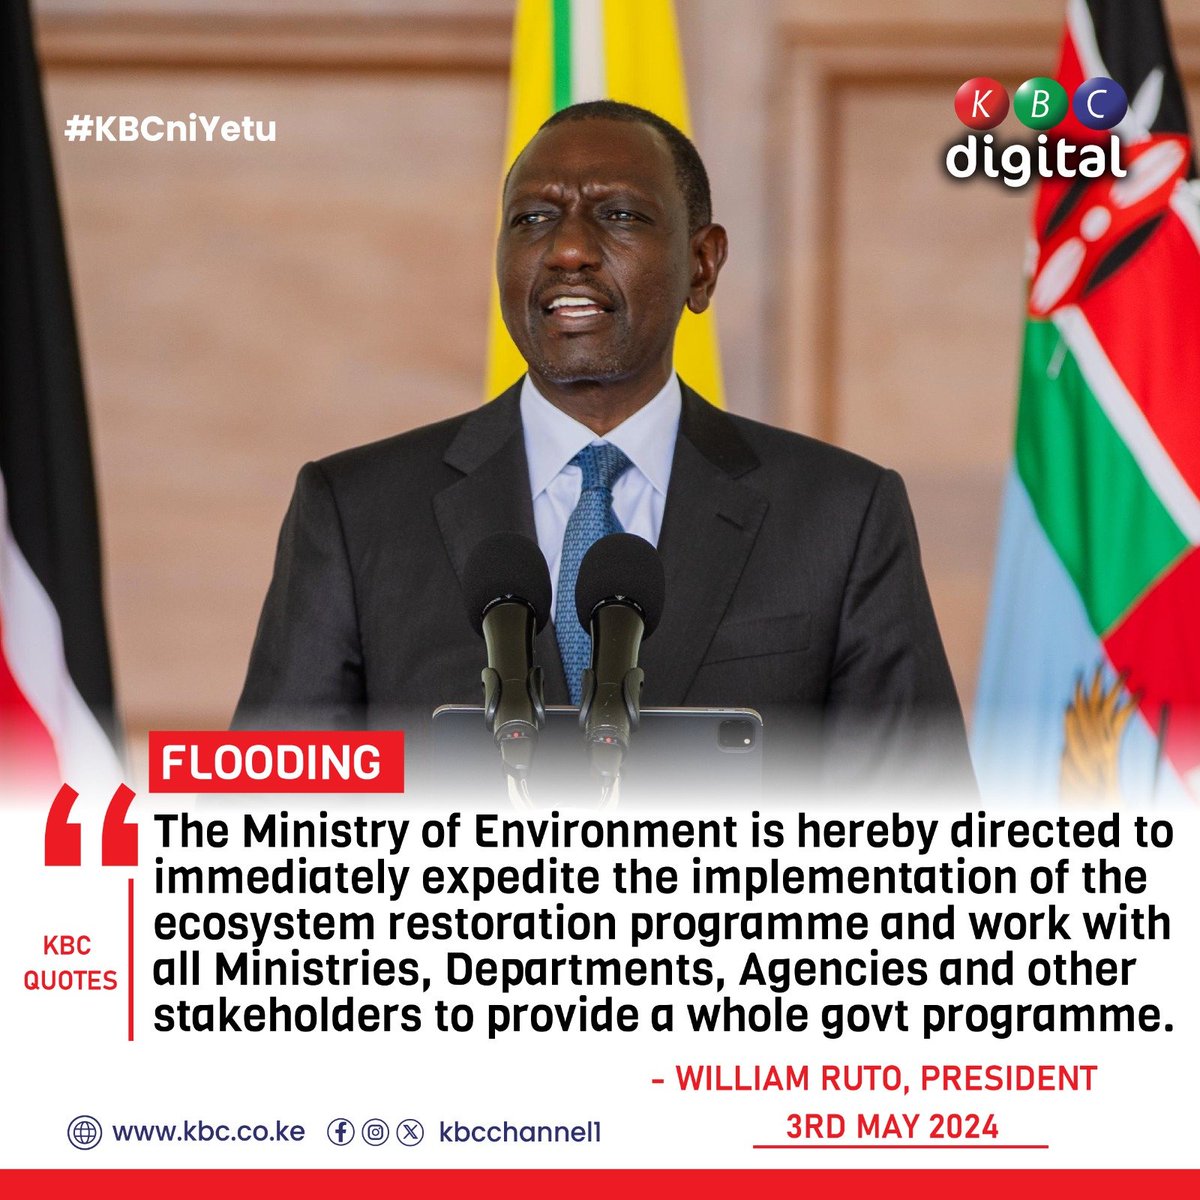 “The Ministry of Environment is hereby directed to immediately expedite the implementation of the ecosystem restoration programme and work with all Ministries, Departments, Agencies and other stakeholders to provide a whole govt programme.’ - William Ruto, President #KBCniYetu…